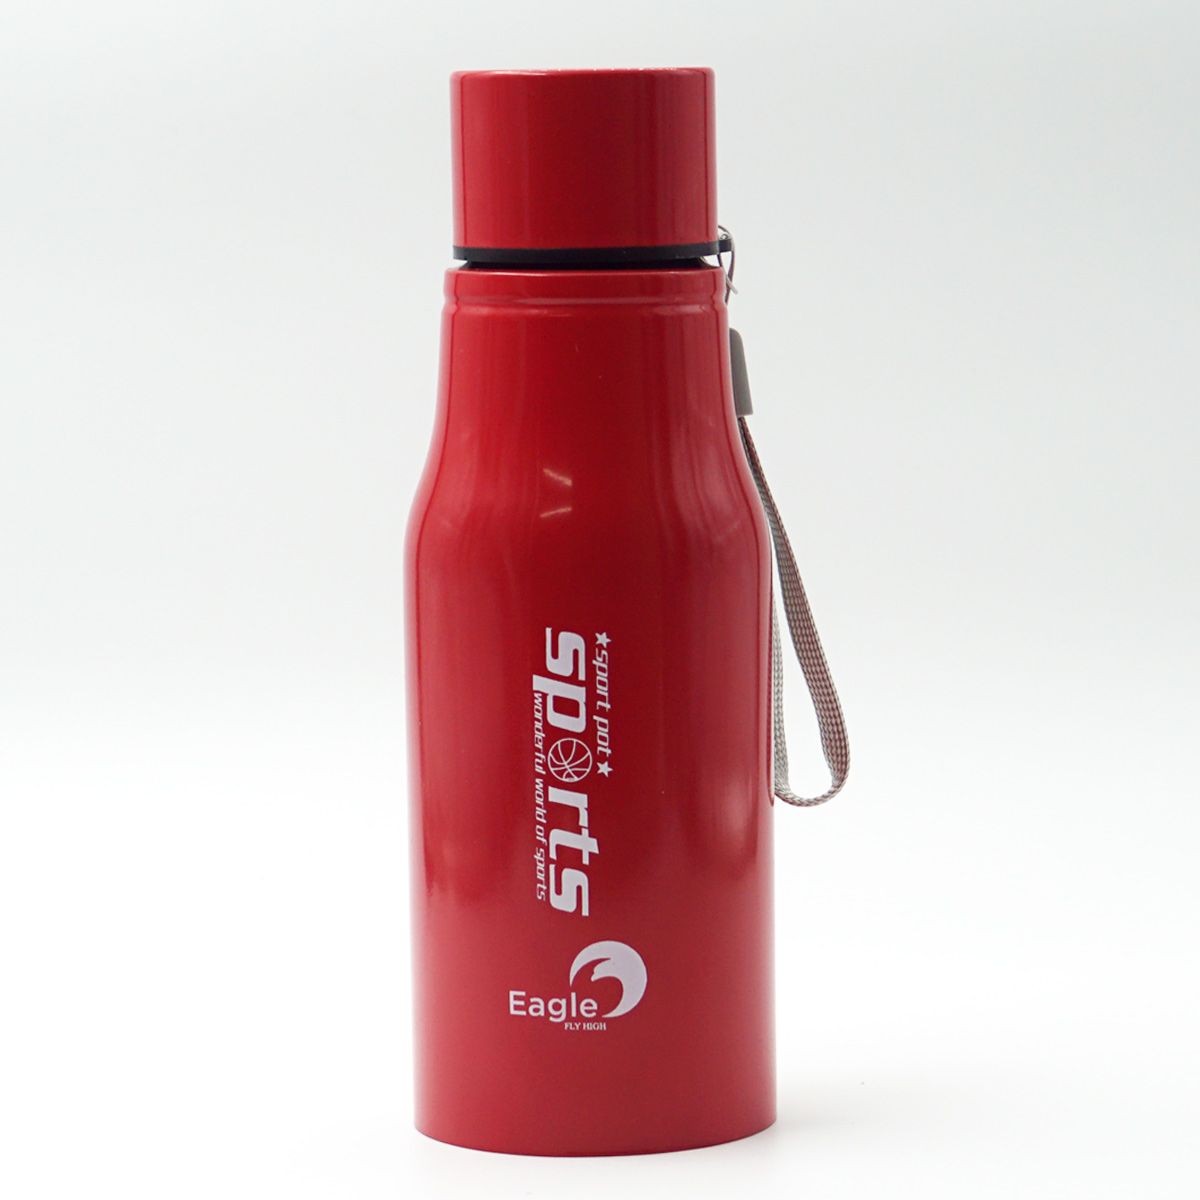 Eagle Stainless Steel Red Color 500ml Sport Water Bottle SKU 96575